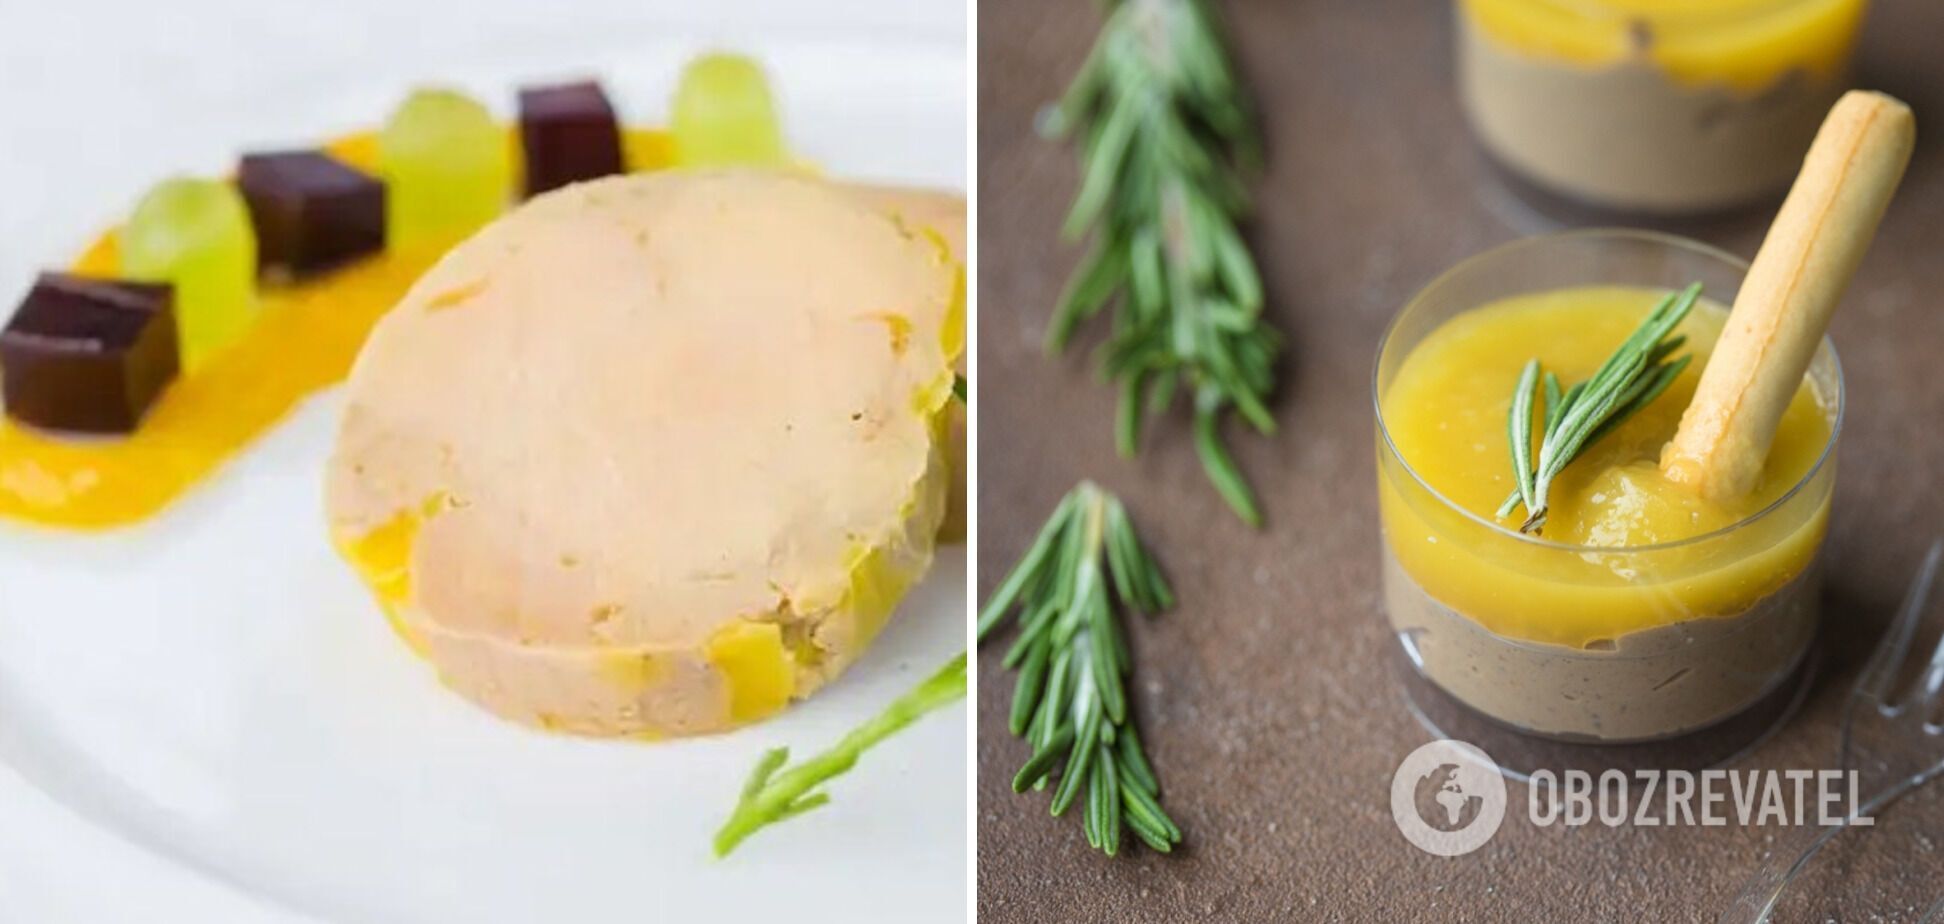 Recipe for pate with lemon